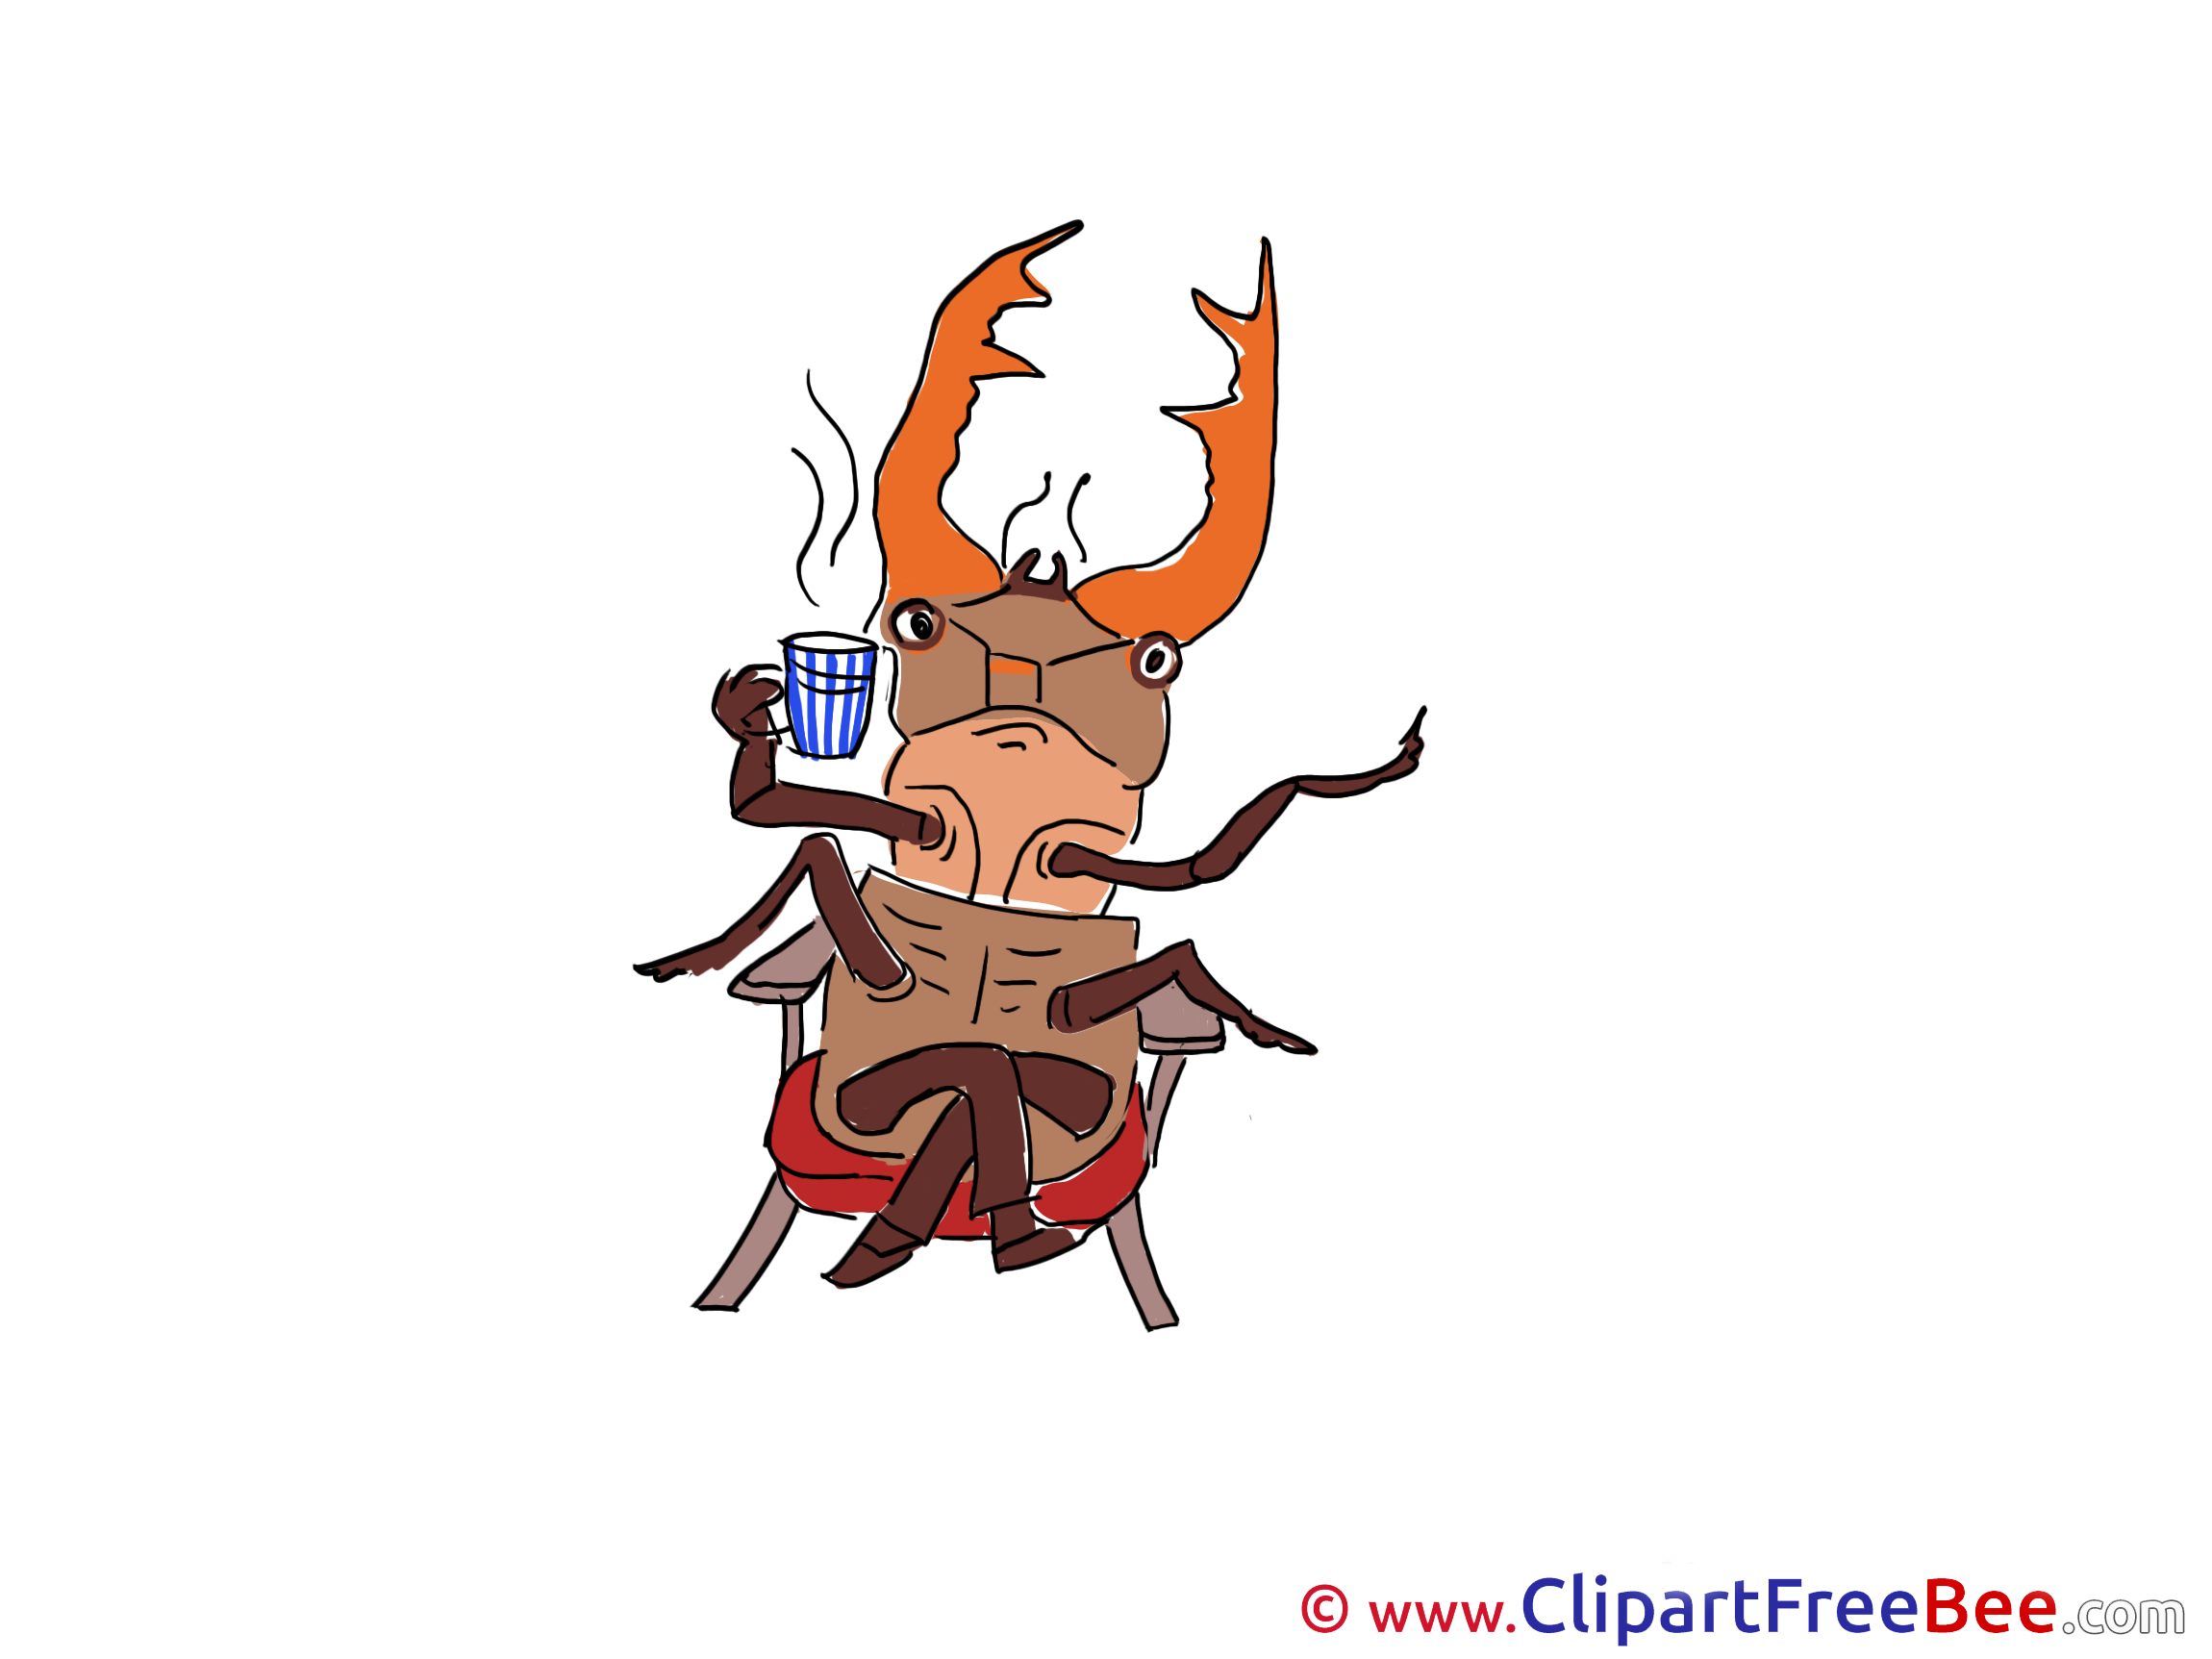 Bug Cup of Tea download Clip Art for free